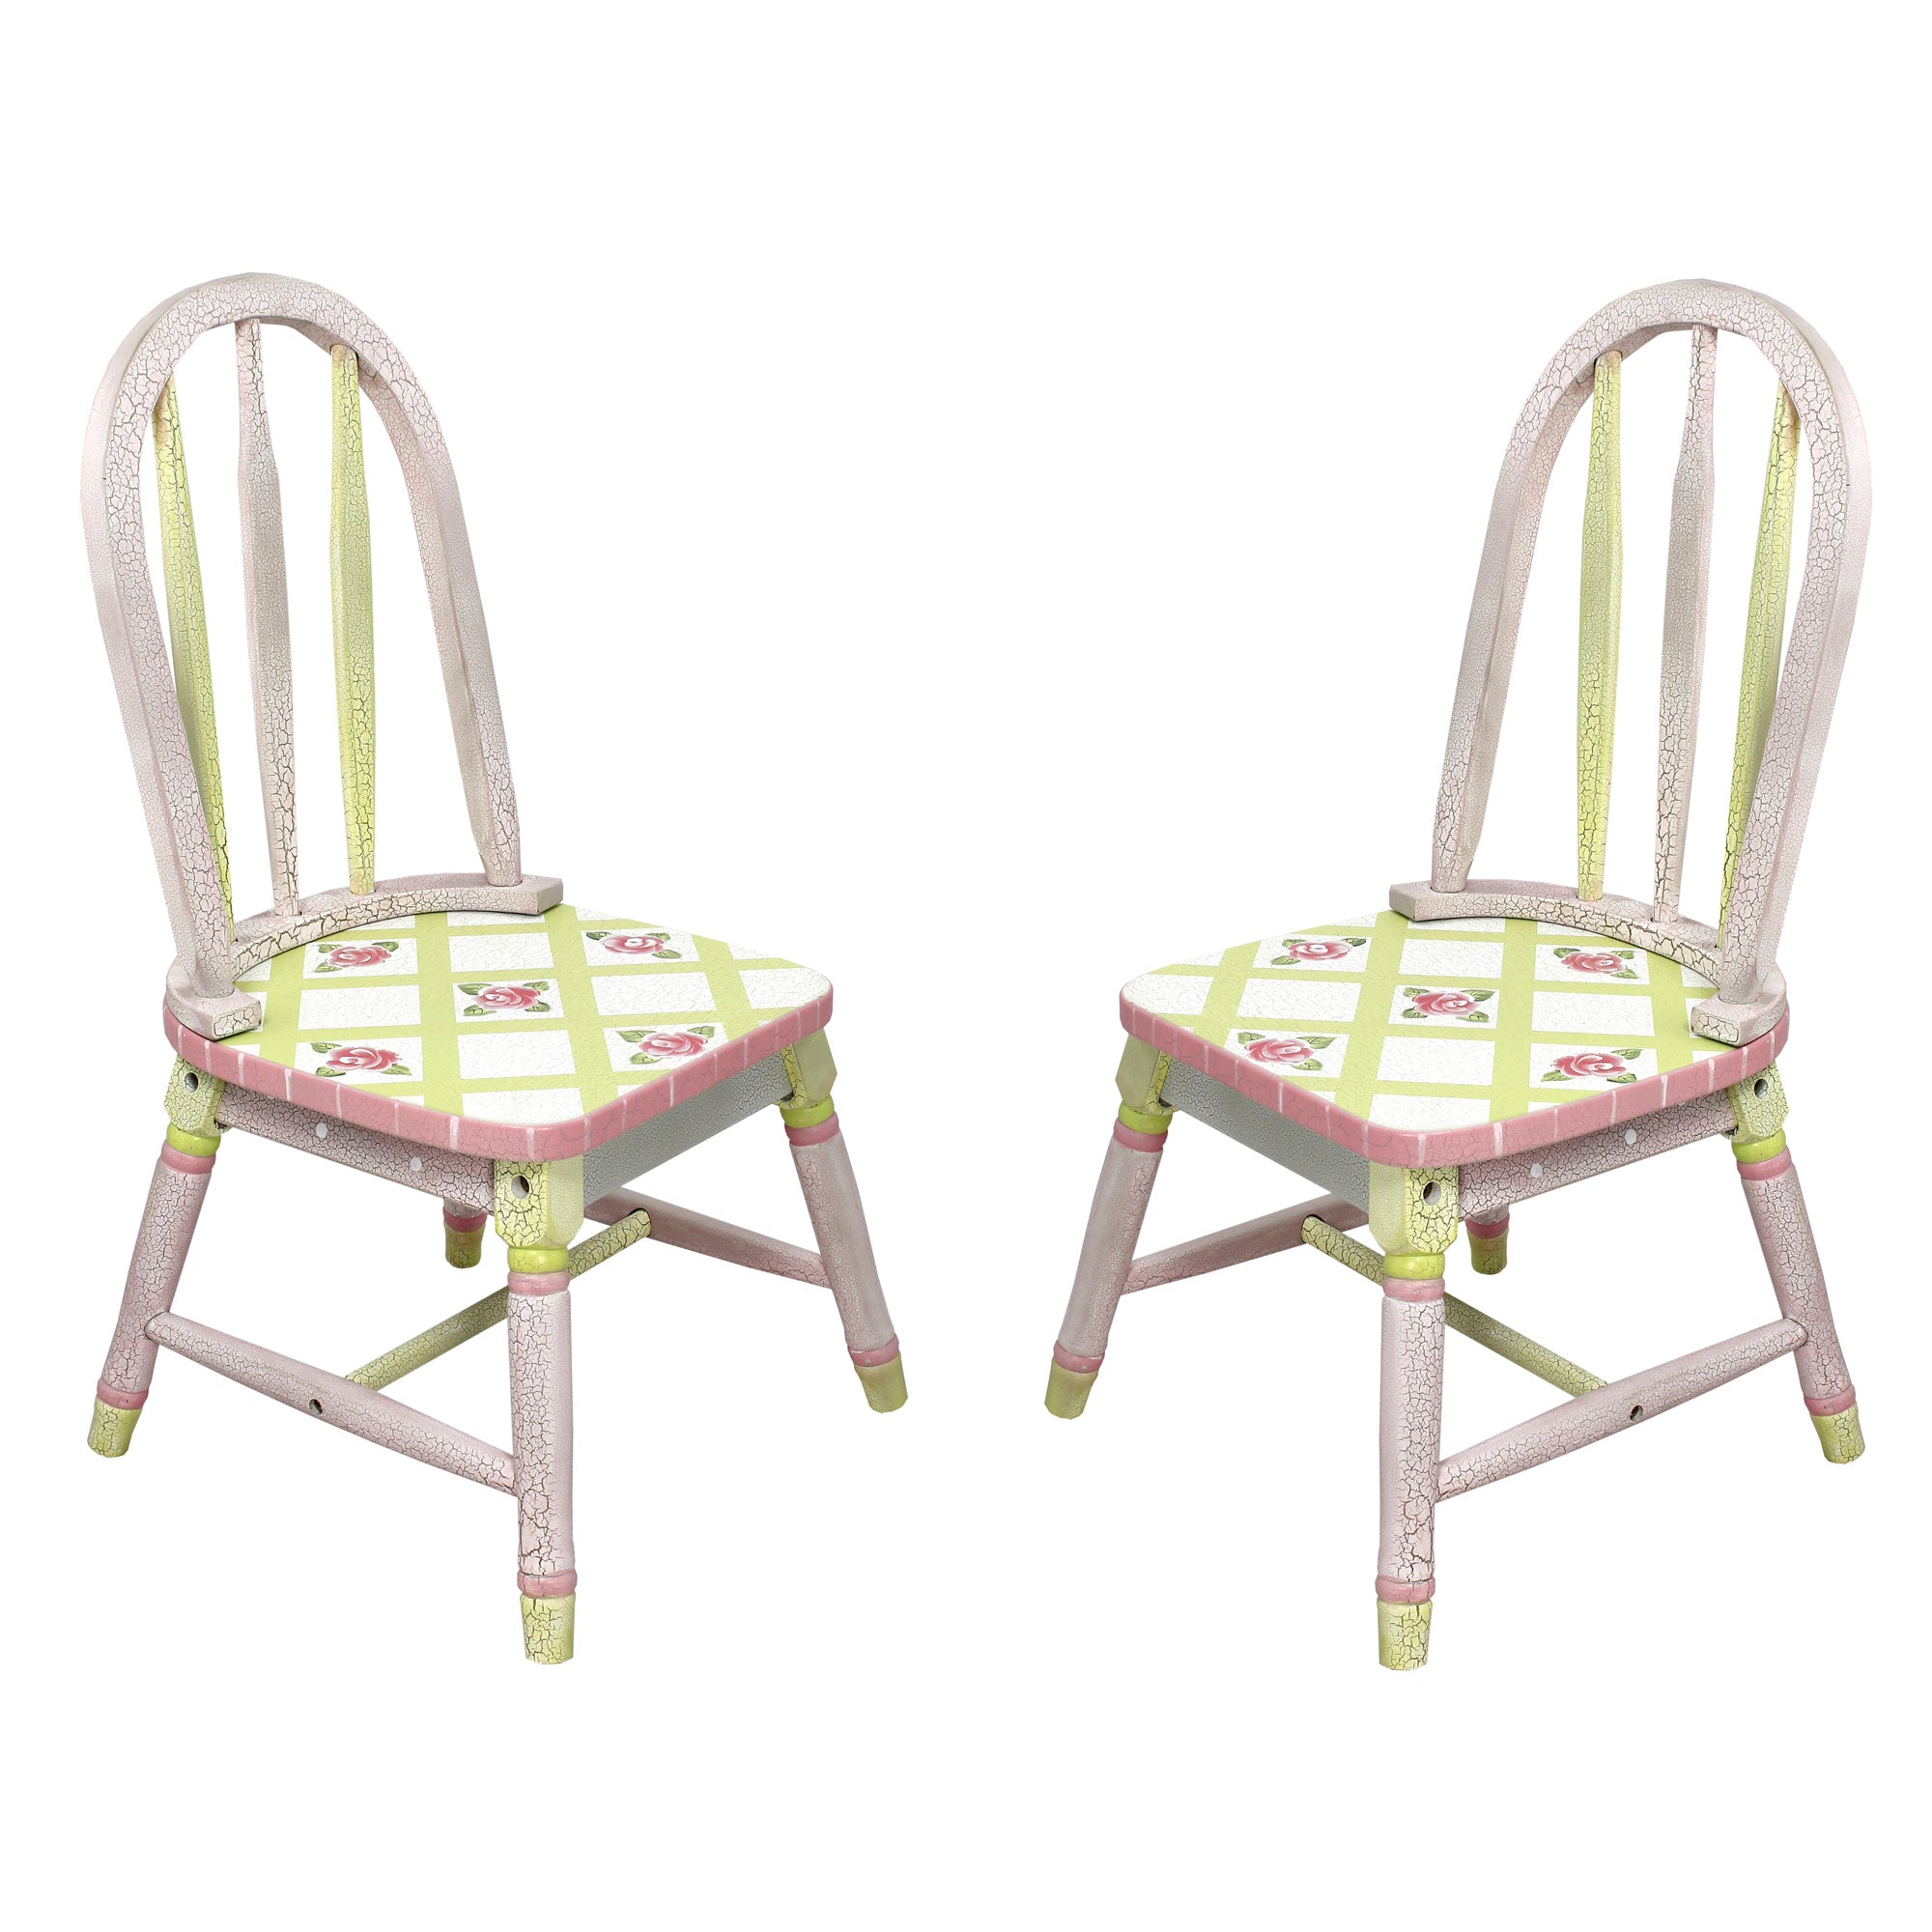 Fantasy Fields Kids Painted Wooden Crackled Rose Chairs, Set of 2, Pink